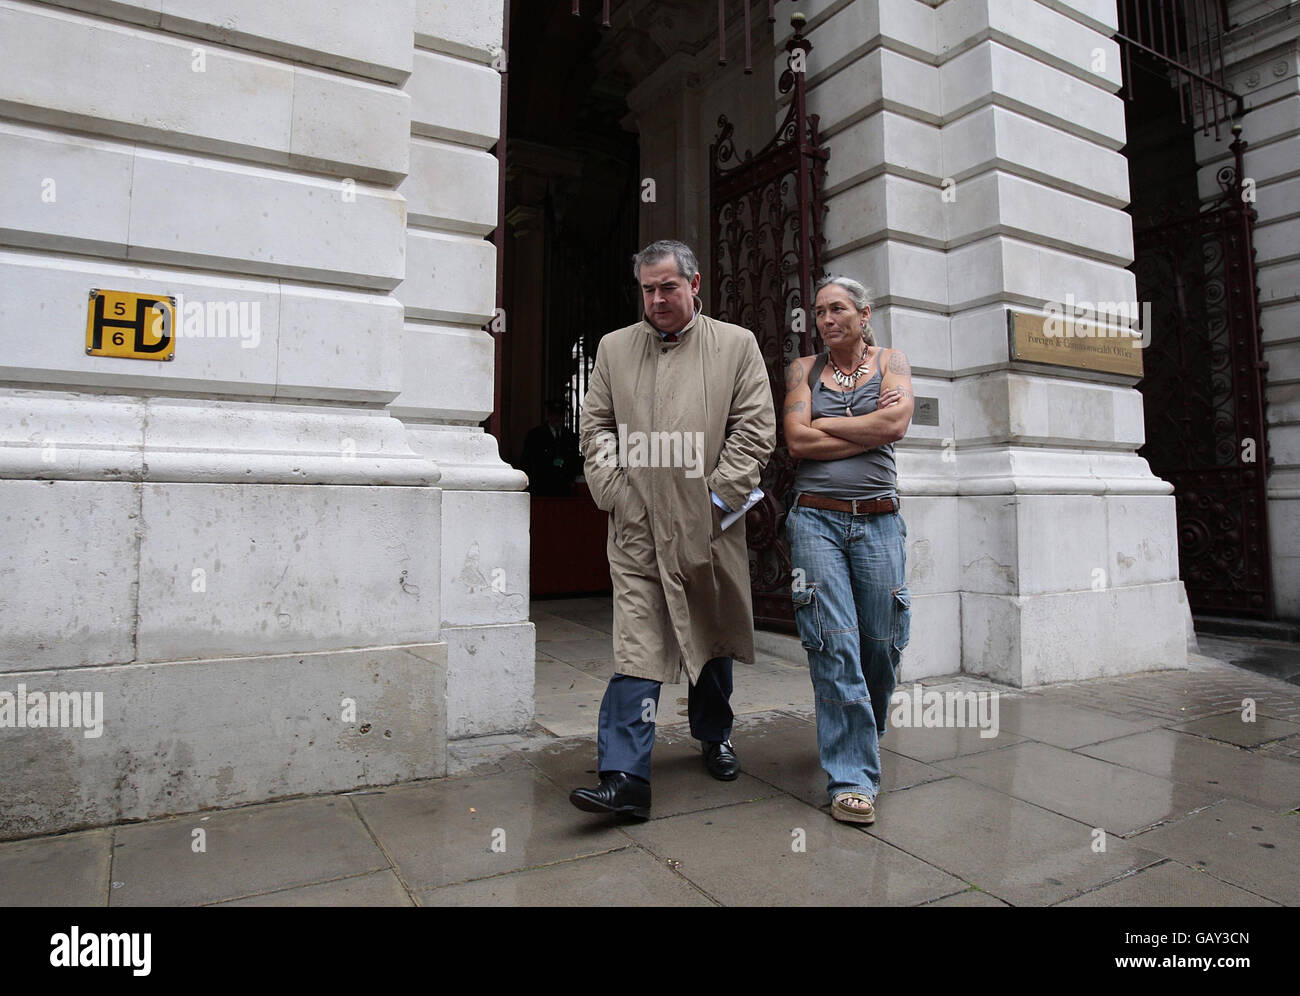 Fiona McKeown, the mother of 15-year old Scarlett Keeling who was murdered in Goa, leaves the Foreign and Commonwealth Office in London, after her meeting with Lord Malloch-Brown to get an update on the investigation into her daughter's death with her MP Geoffrey Cox, (Conservative MP for Torridge and West Devon). Stock Photo